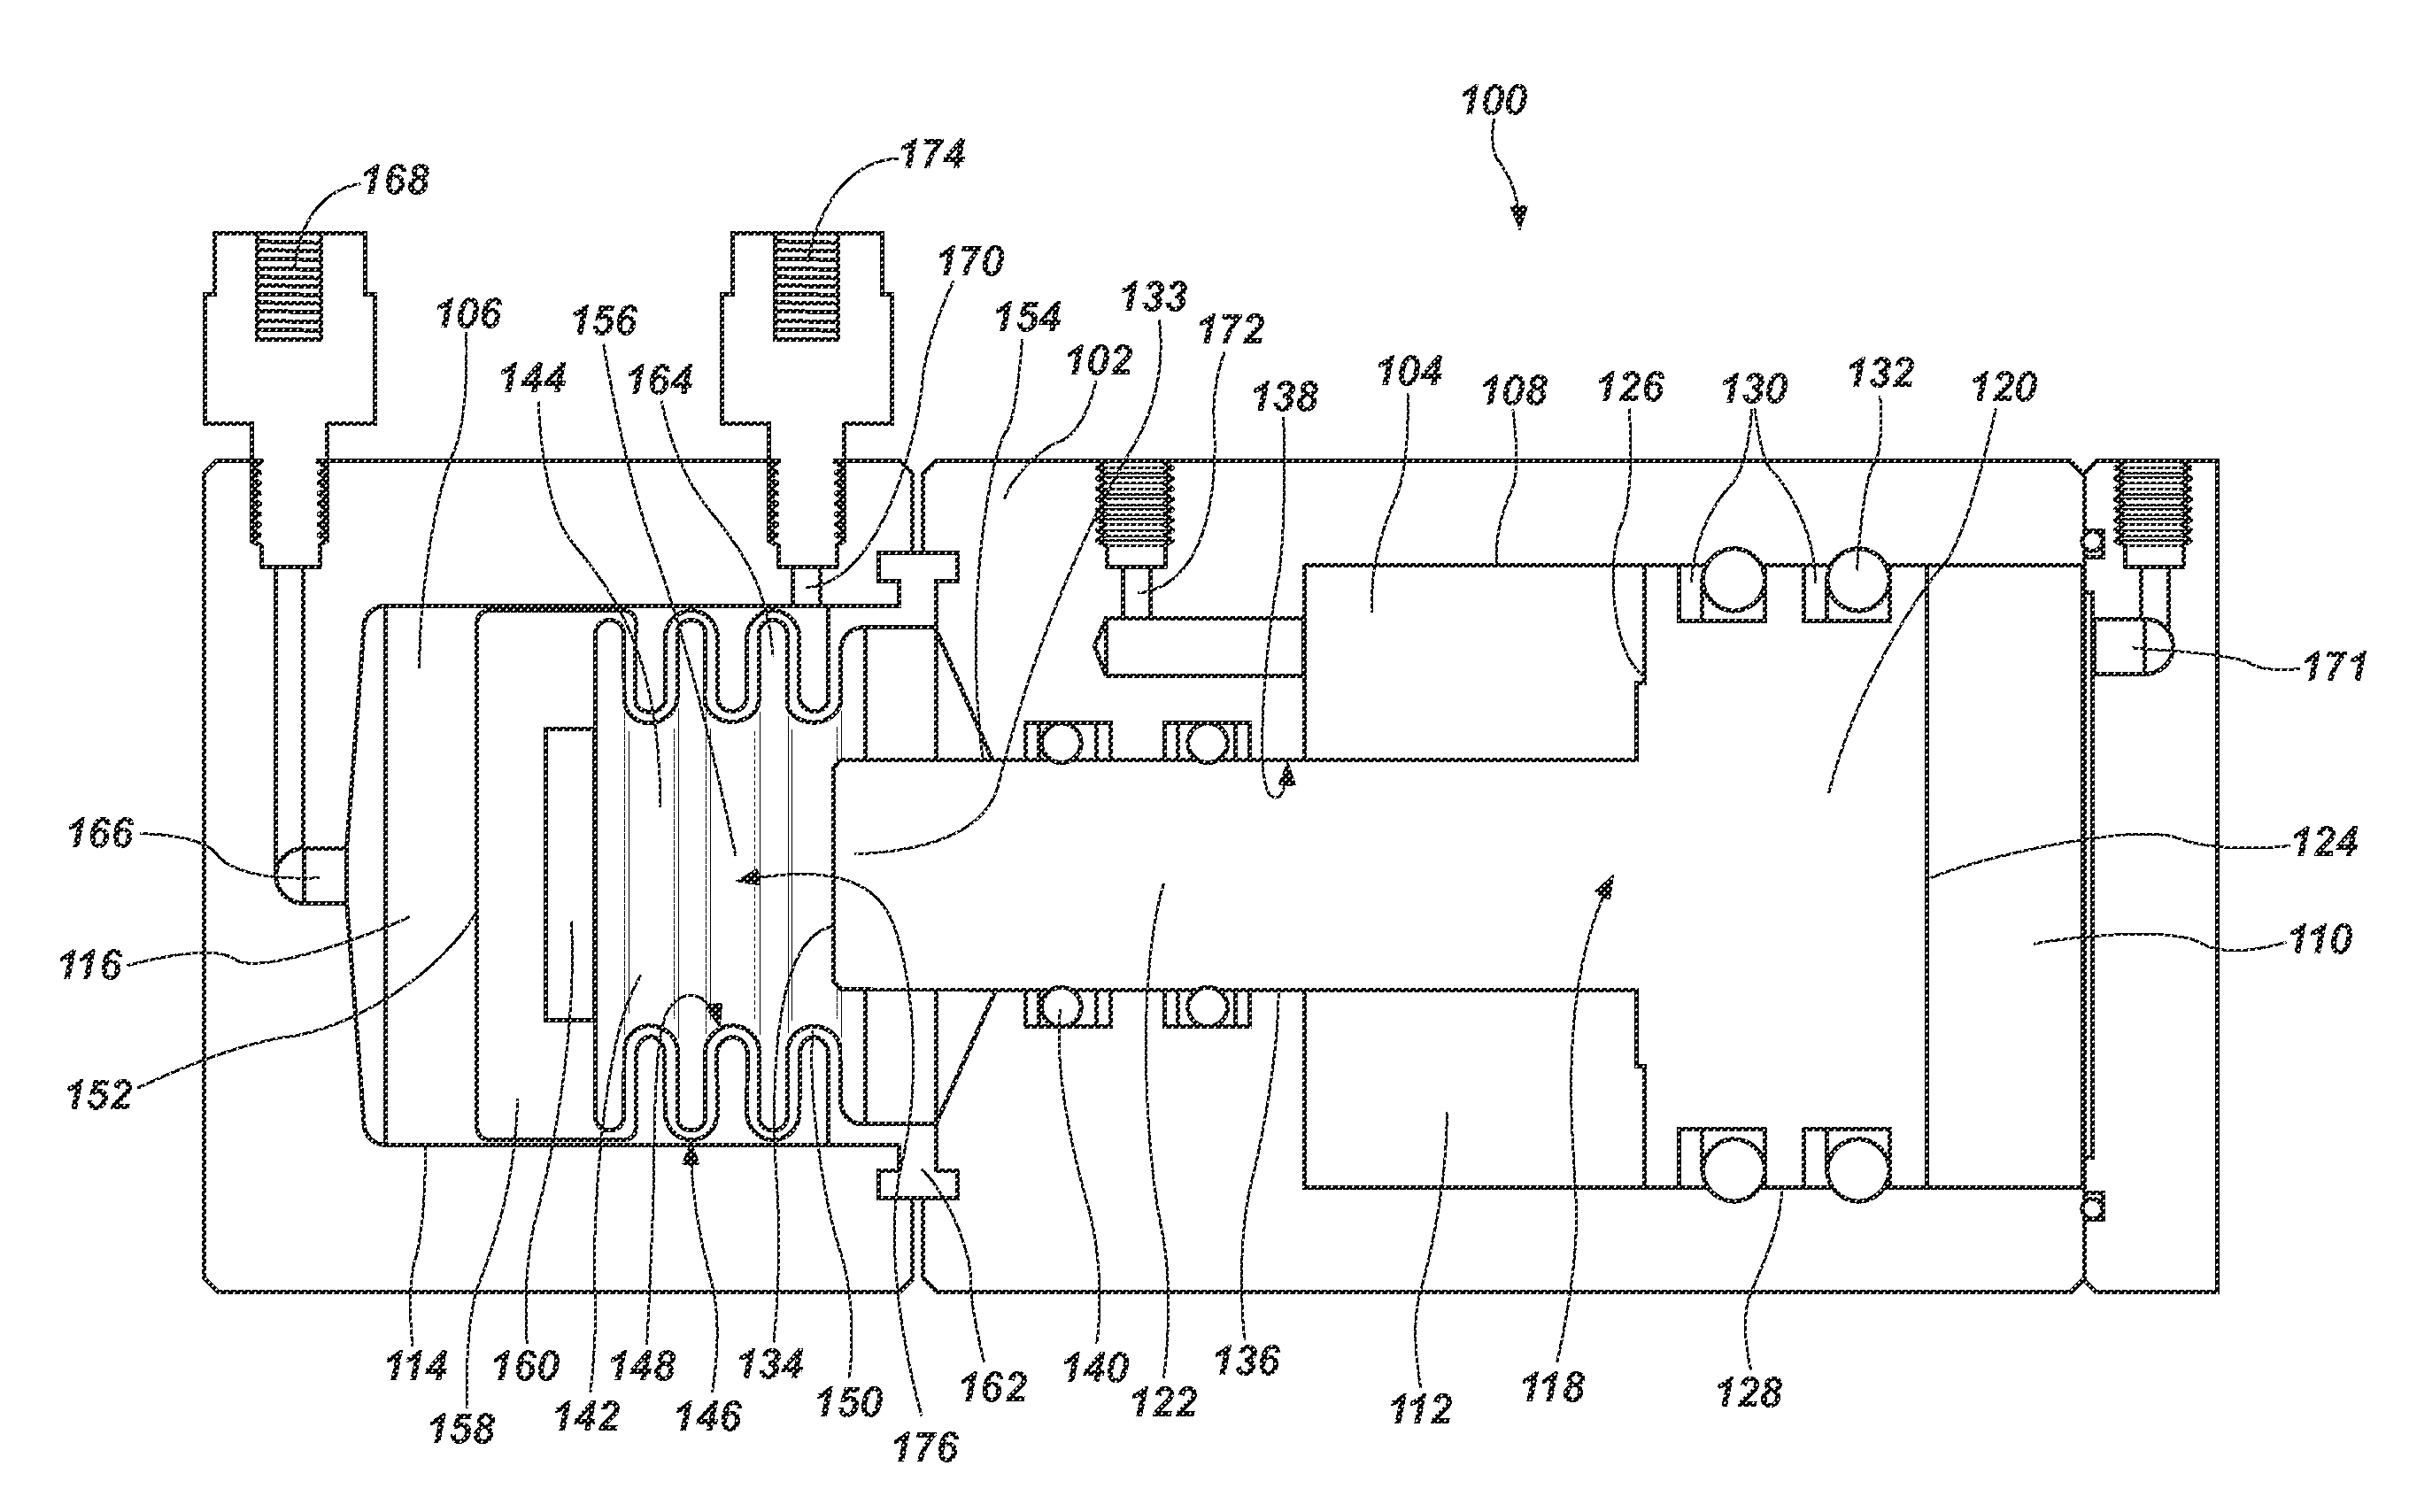 Pneumatically-operated fluid pump with amplified fluid pressure, and related methods